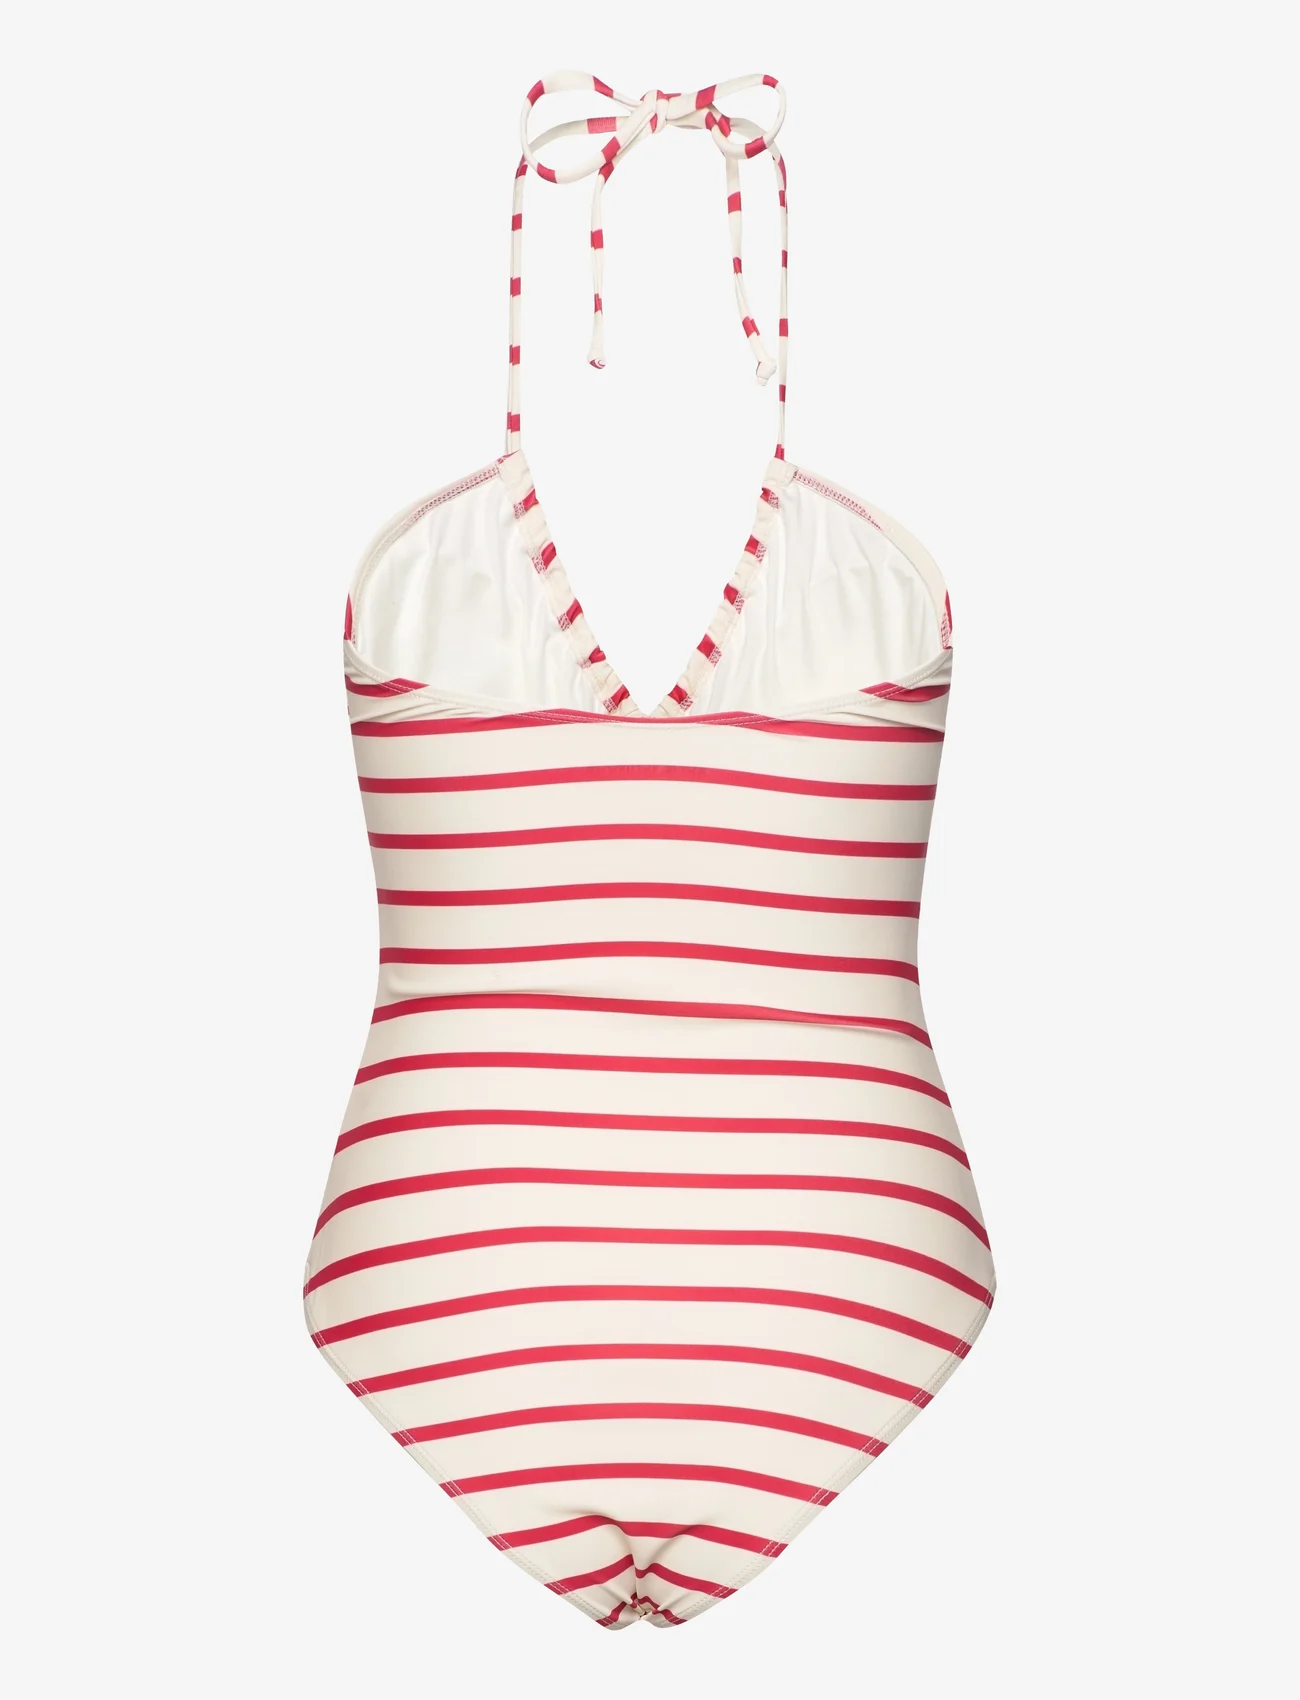 Sofie Schnoor - Swimsuit - swimsuits - red striped - 1